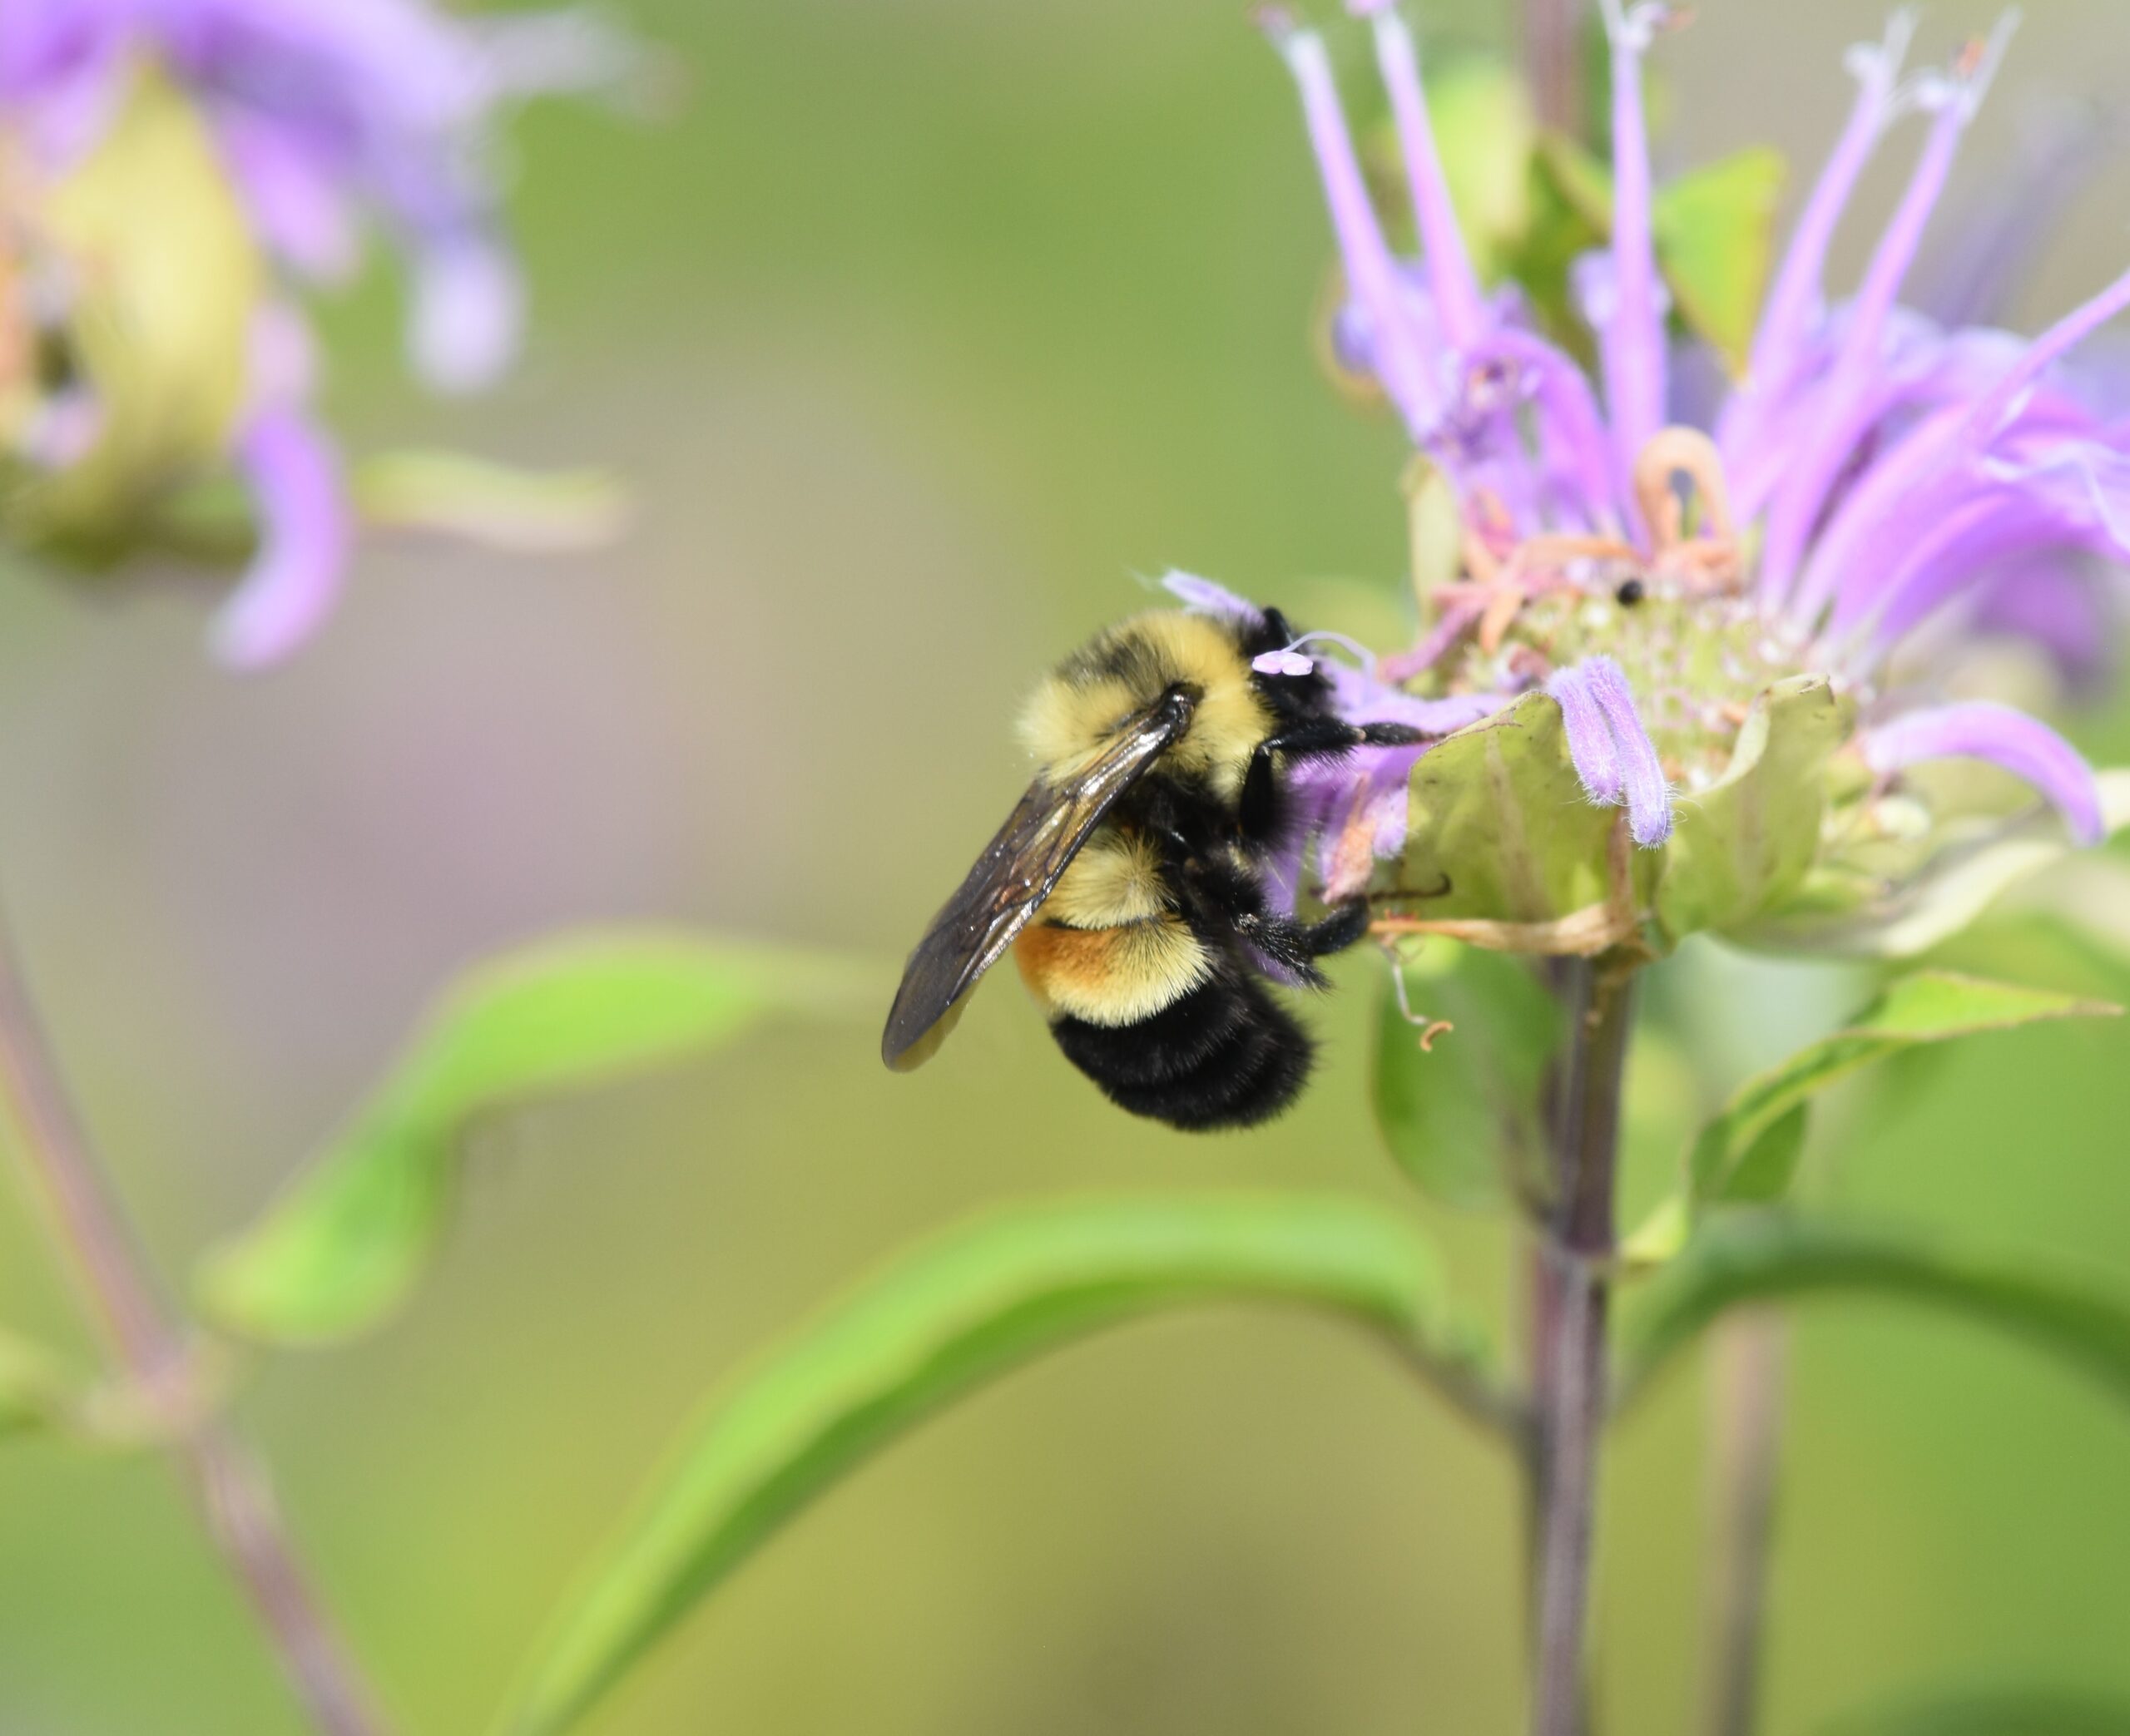 Federal grant aims to restore rusty patched bumble bee near Two Rivers